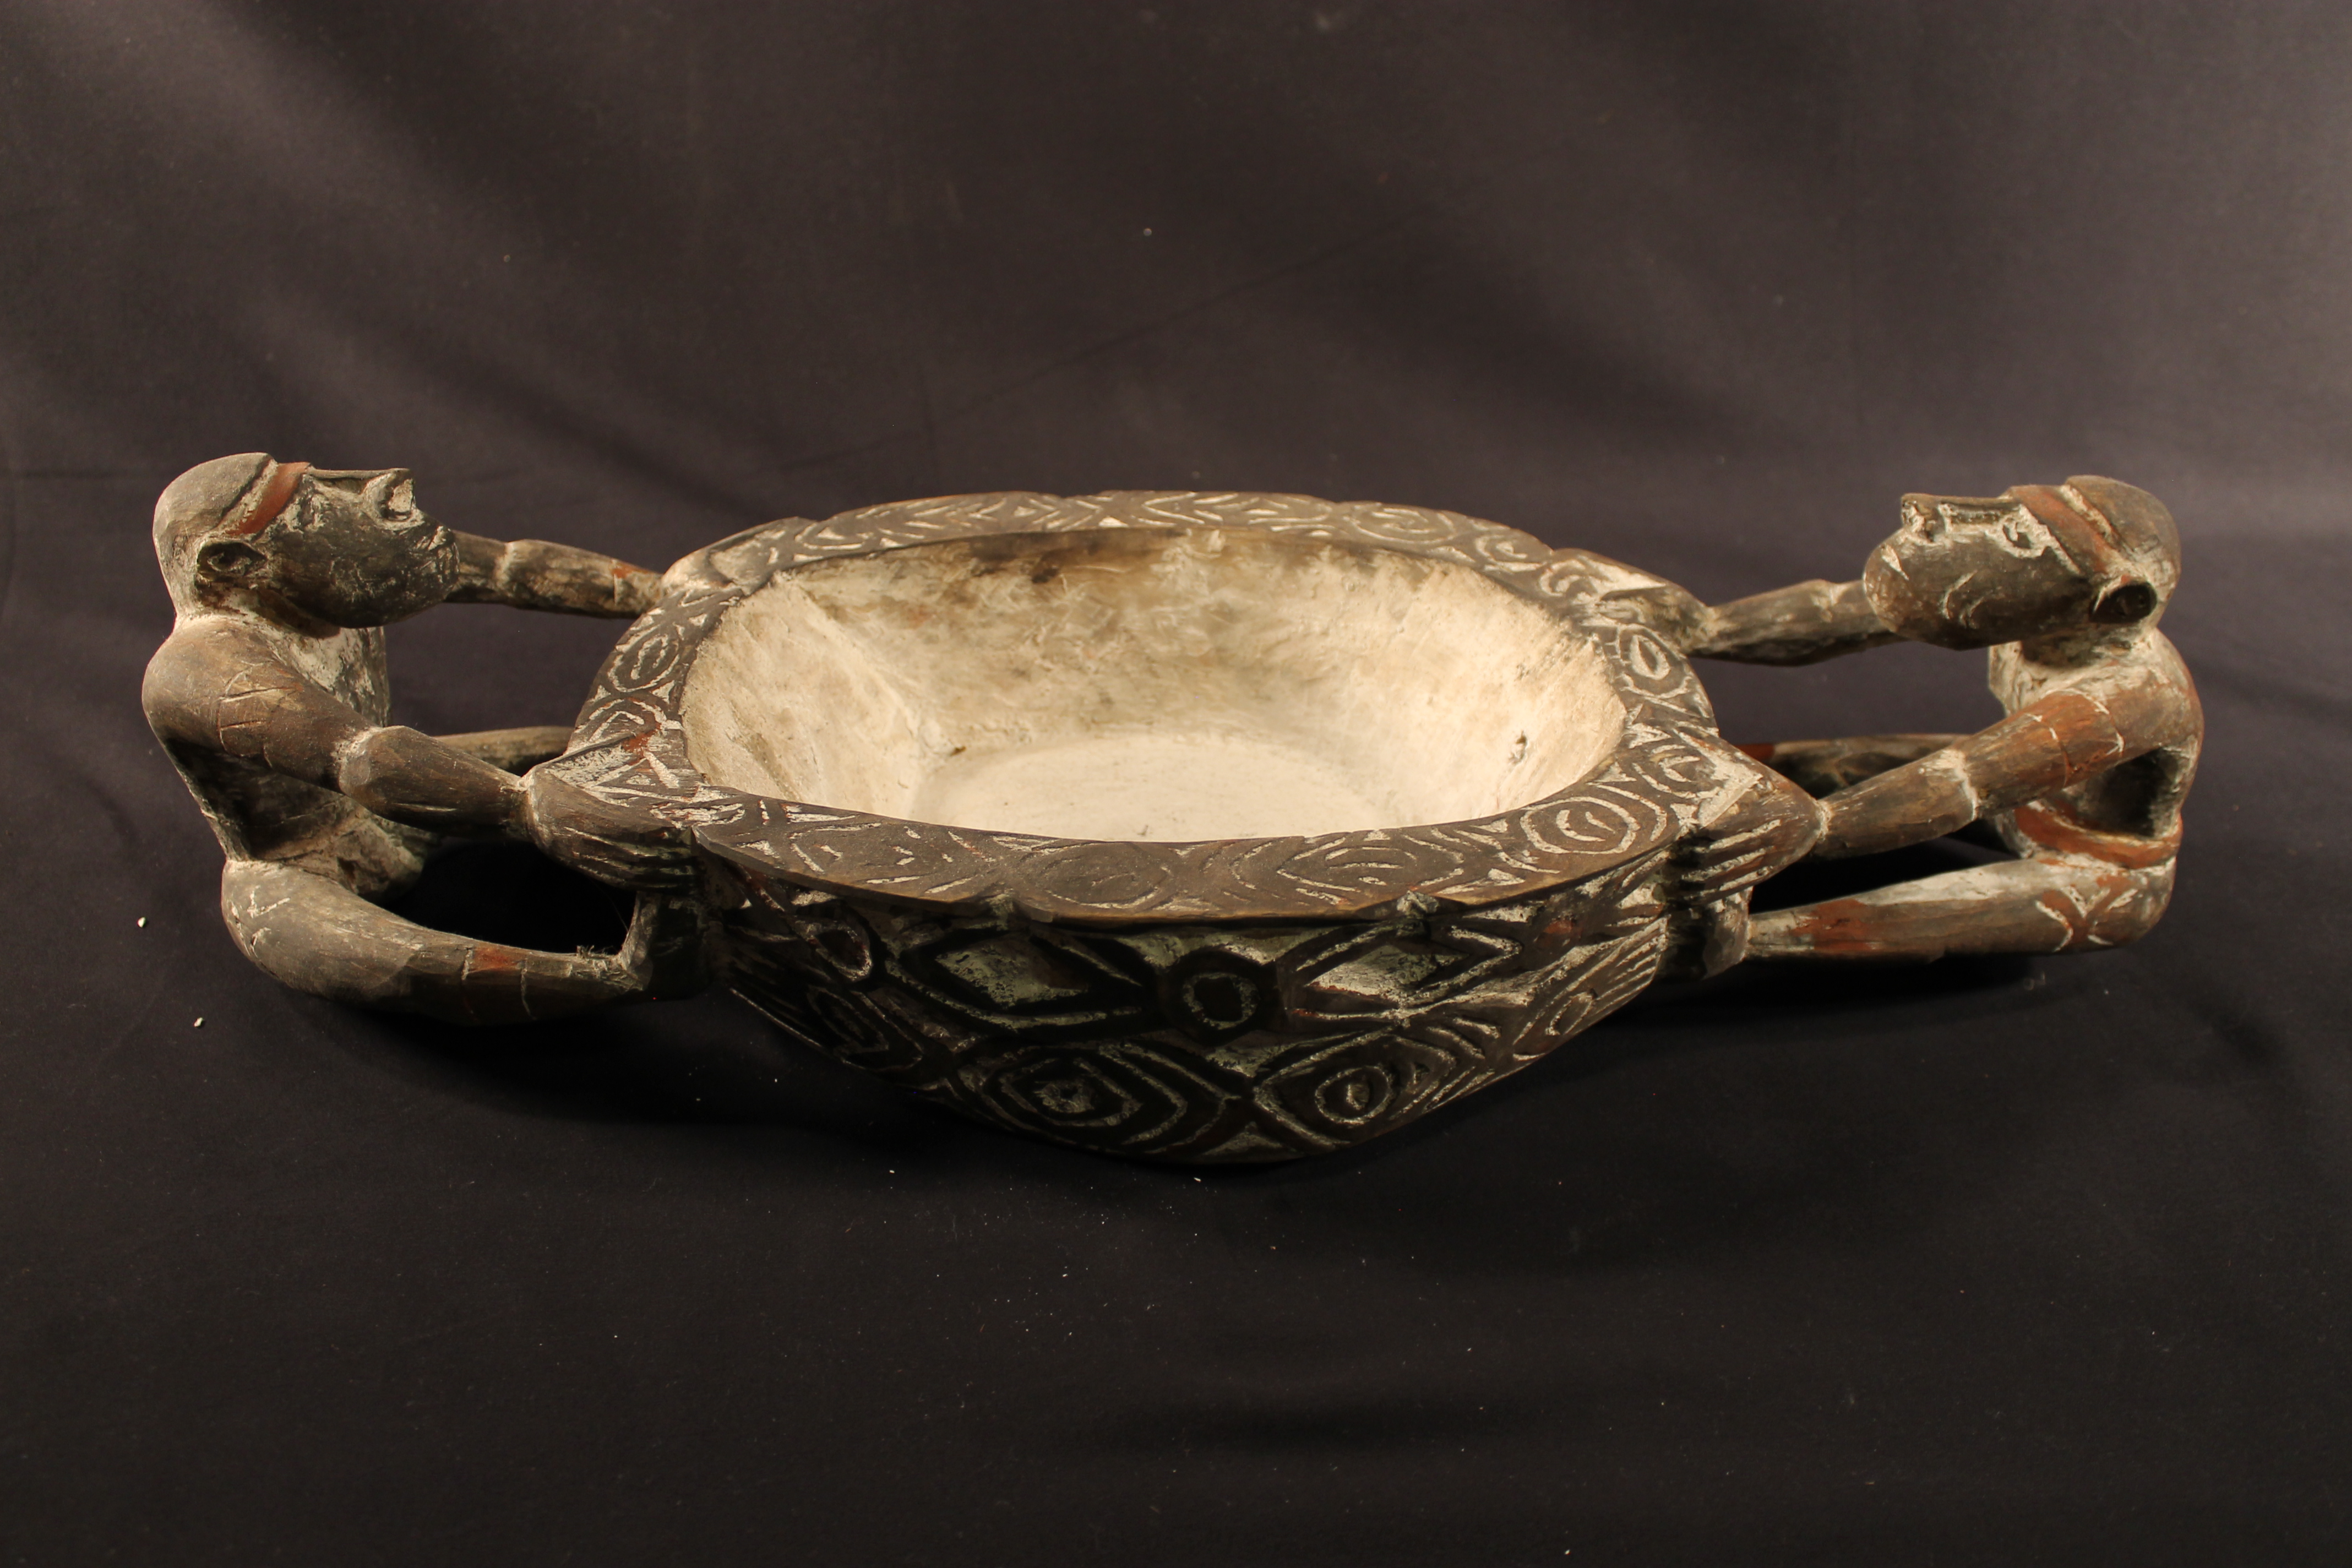 Wooden bowl with white interior. On the sides are male and female figures that act as handles for the bowl. 